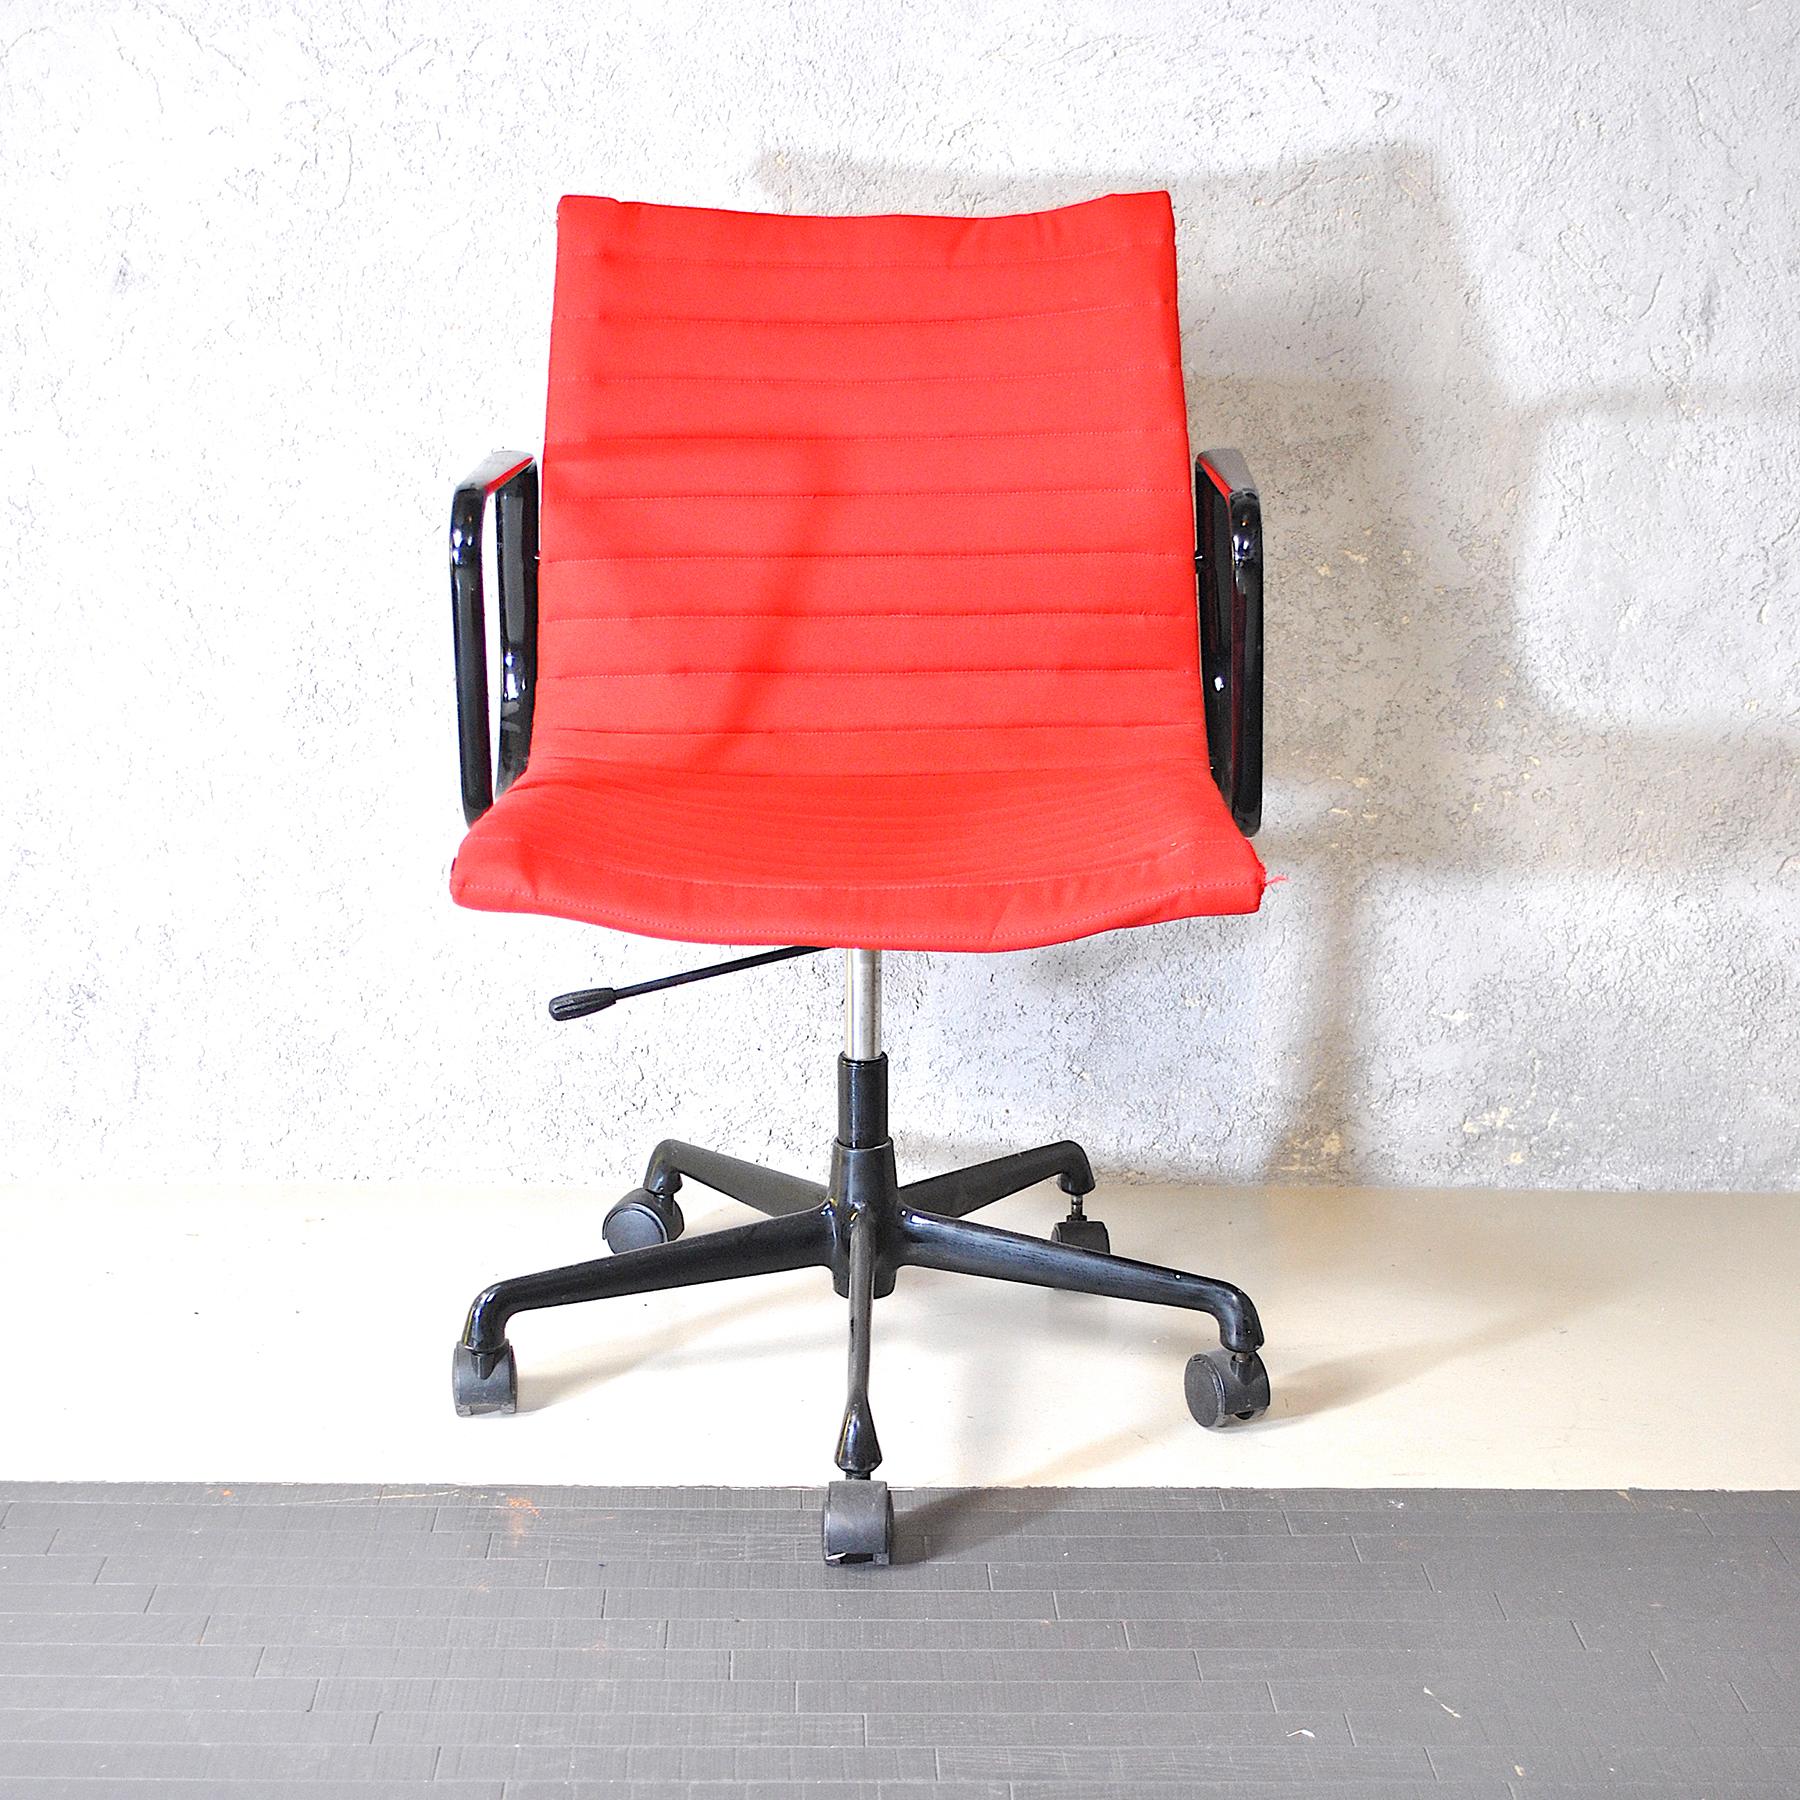 Herman Miller office chair in red fabric from late 1980s.